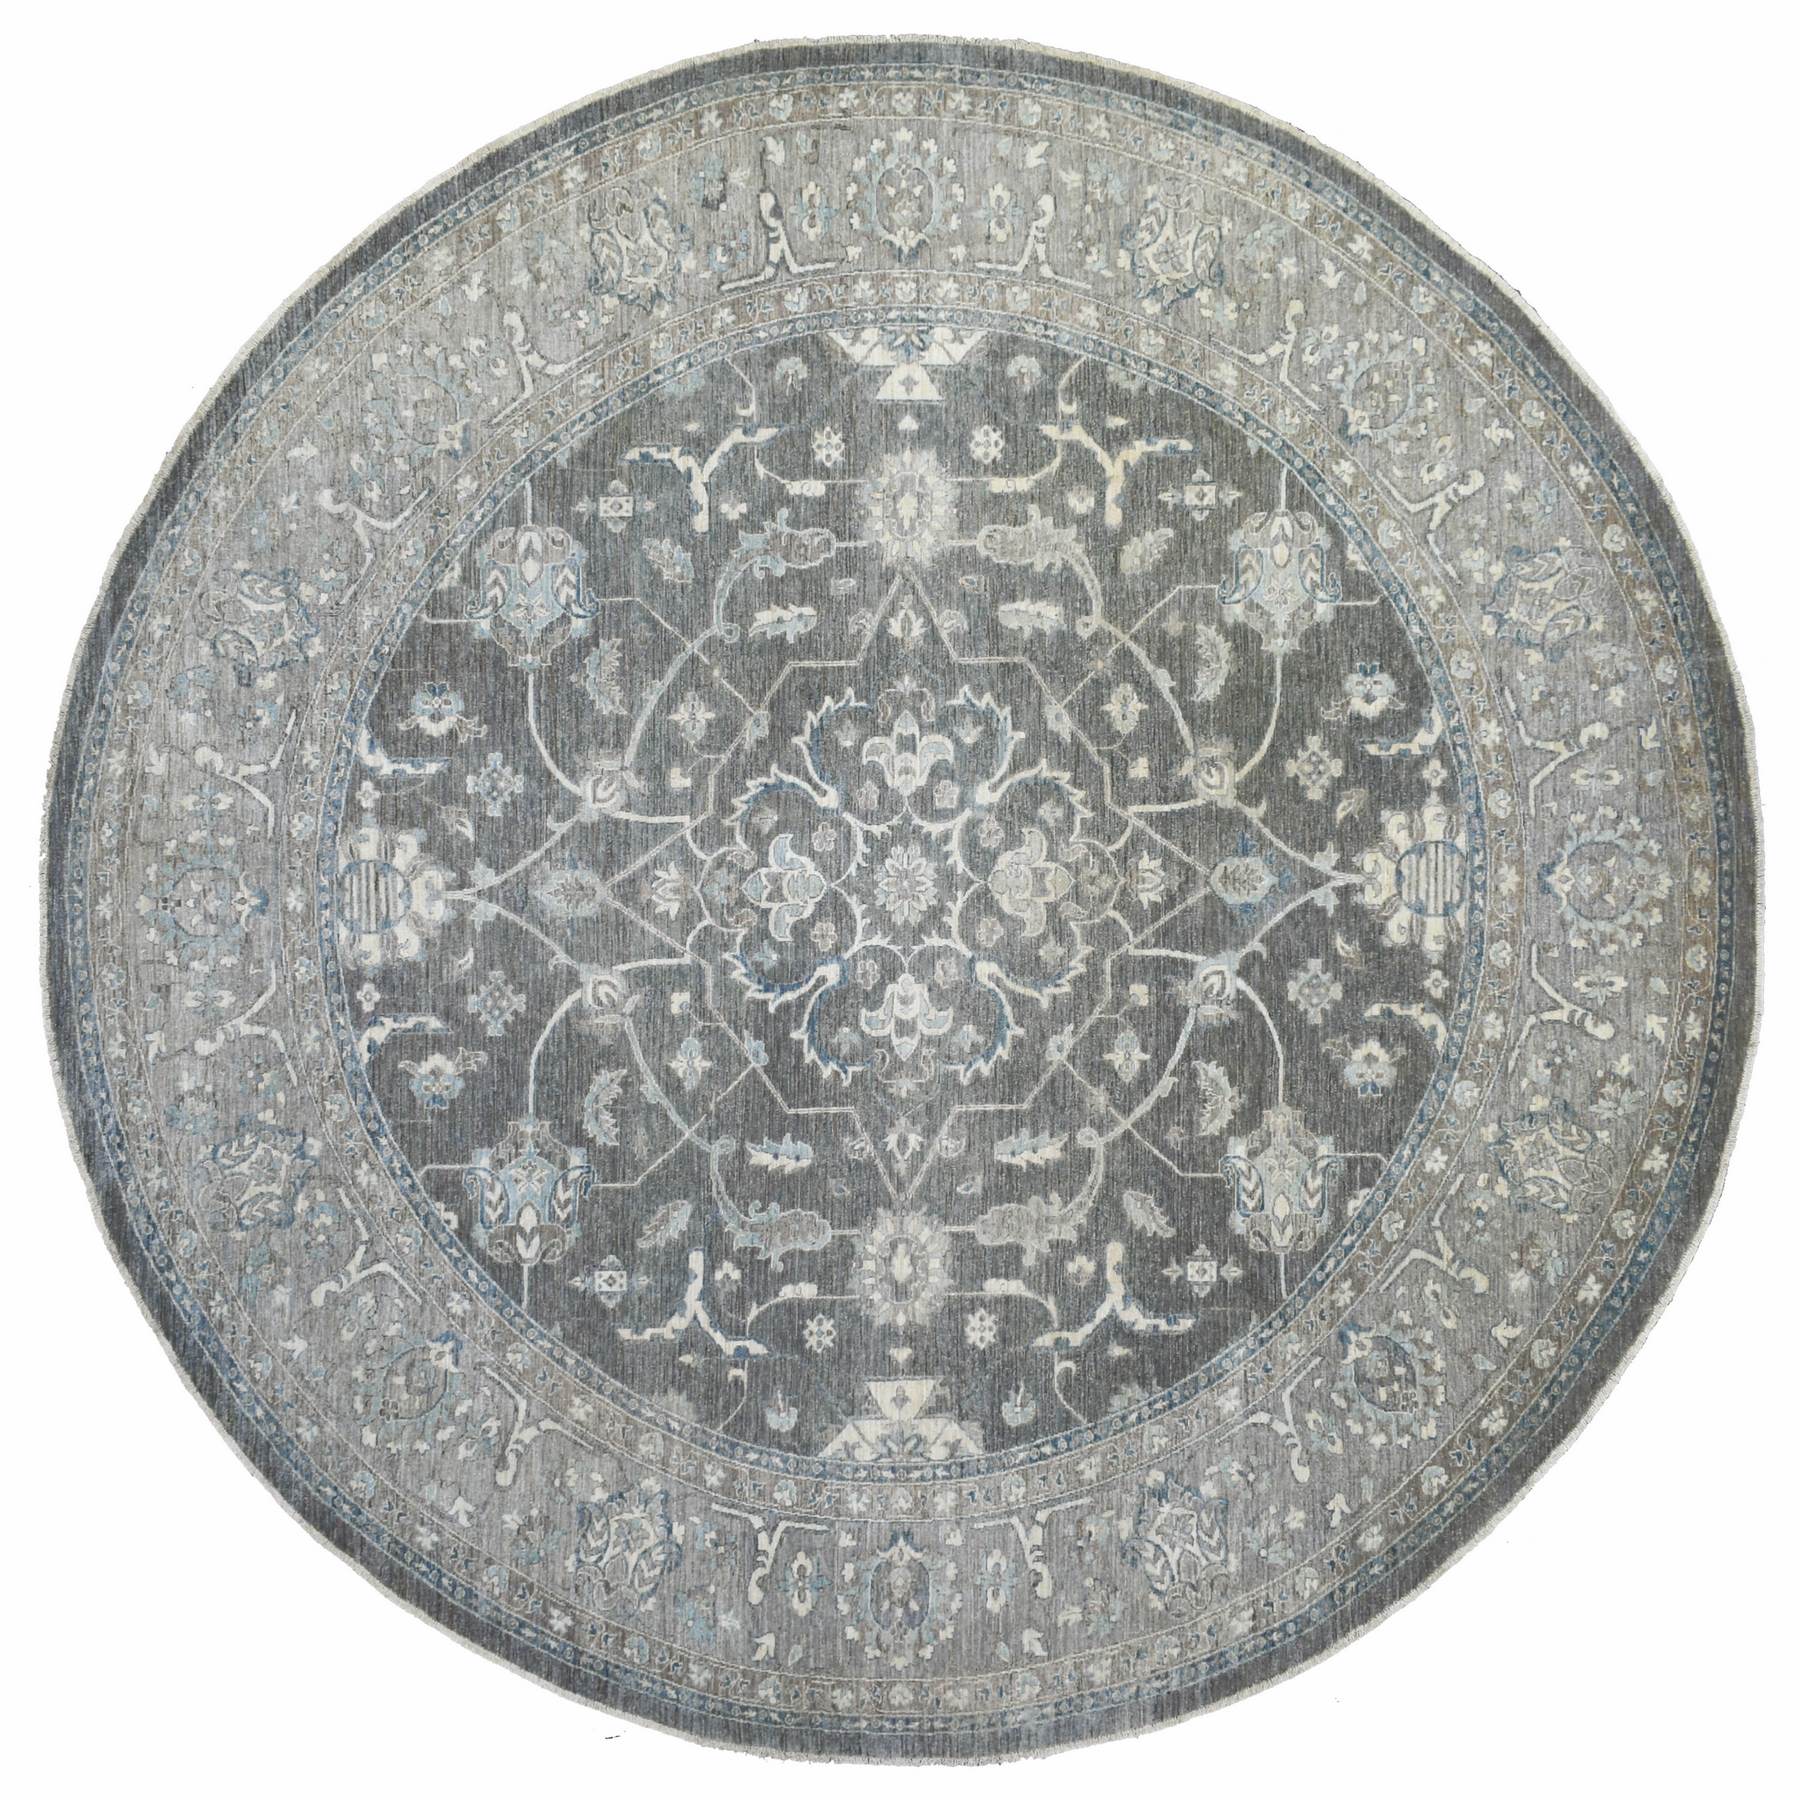 12'x12' Charcoal Gray, Fine Peshawar with Floral Pattern, Densely Woven, Hand Woven, Natural Wool Round Oriental Rug 